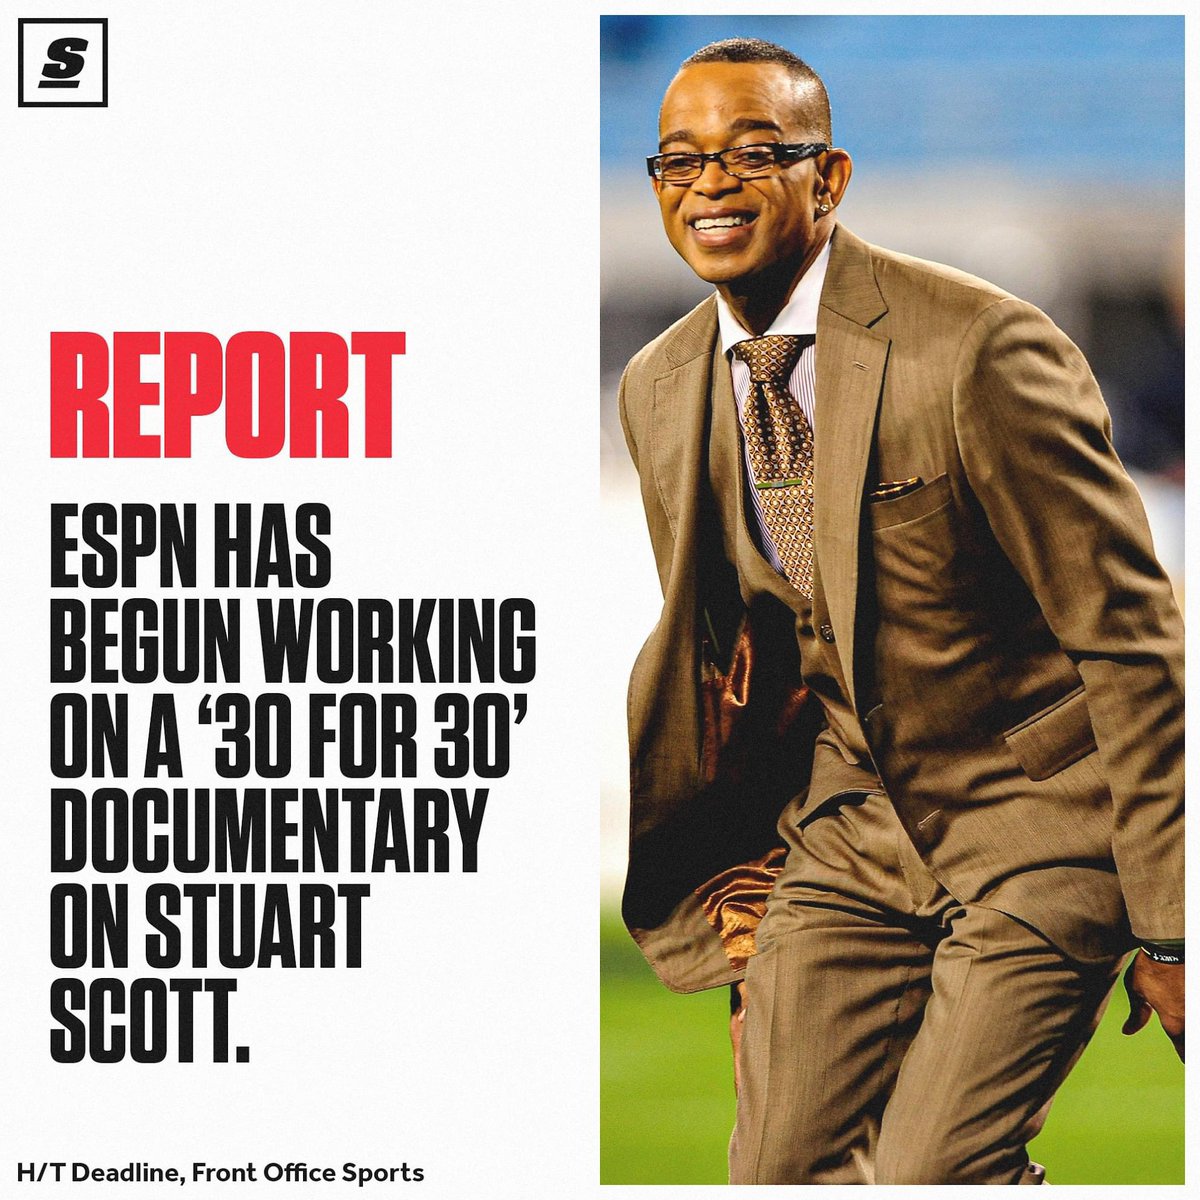 Love this for his memory and his family. Well deserved. Well done #ESPN. #StuartScott. #AsCoolAsTheOtherSideOfThePillow #BooYah!